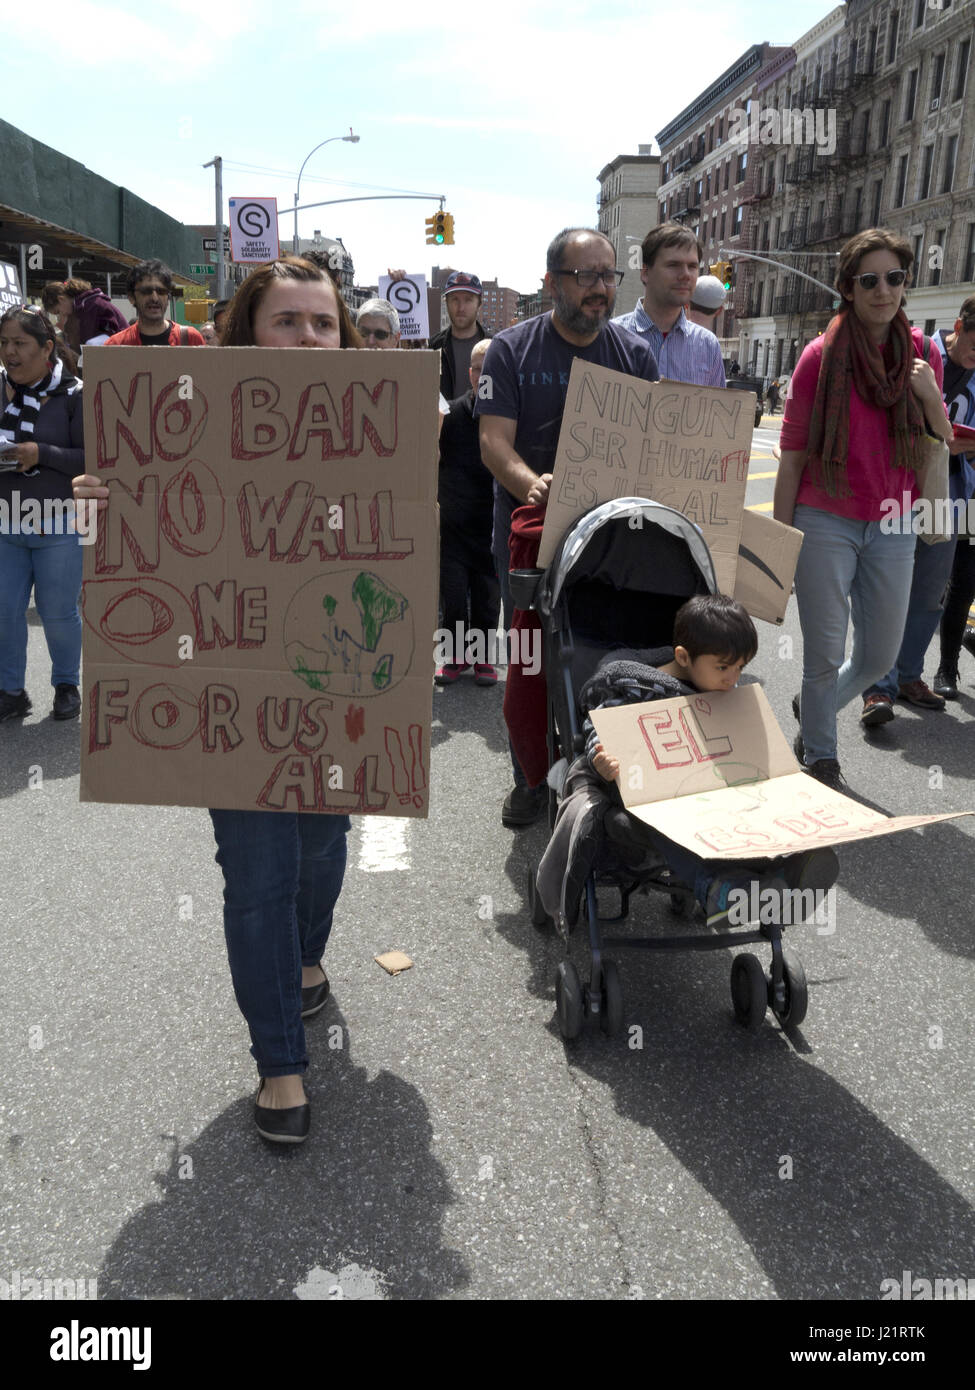 New York City NY, USA. 23rd Apr, 2017. Hundreds of protesters gathered in Harlem to rally and march from W.145th St. to Inwood in The Uptown March for Immigrants. Protesters demanded an end to detention and deportations, collaboration between ICE and local police, the separation of families, the Muslim ban, the wall, and the criminalization of immigrants. Credit: Ethel Wolvovitz/Alamy Live News Stock Photo